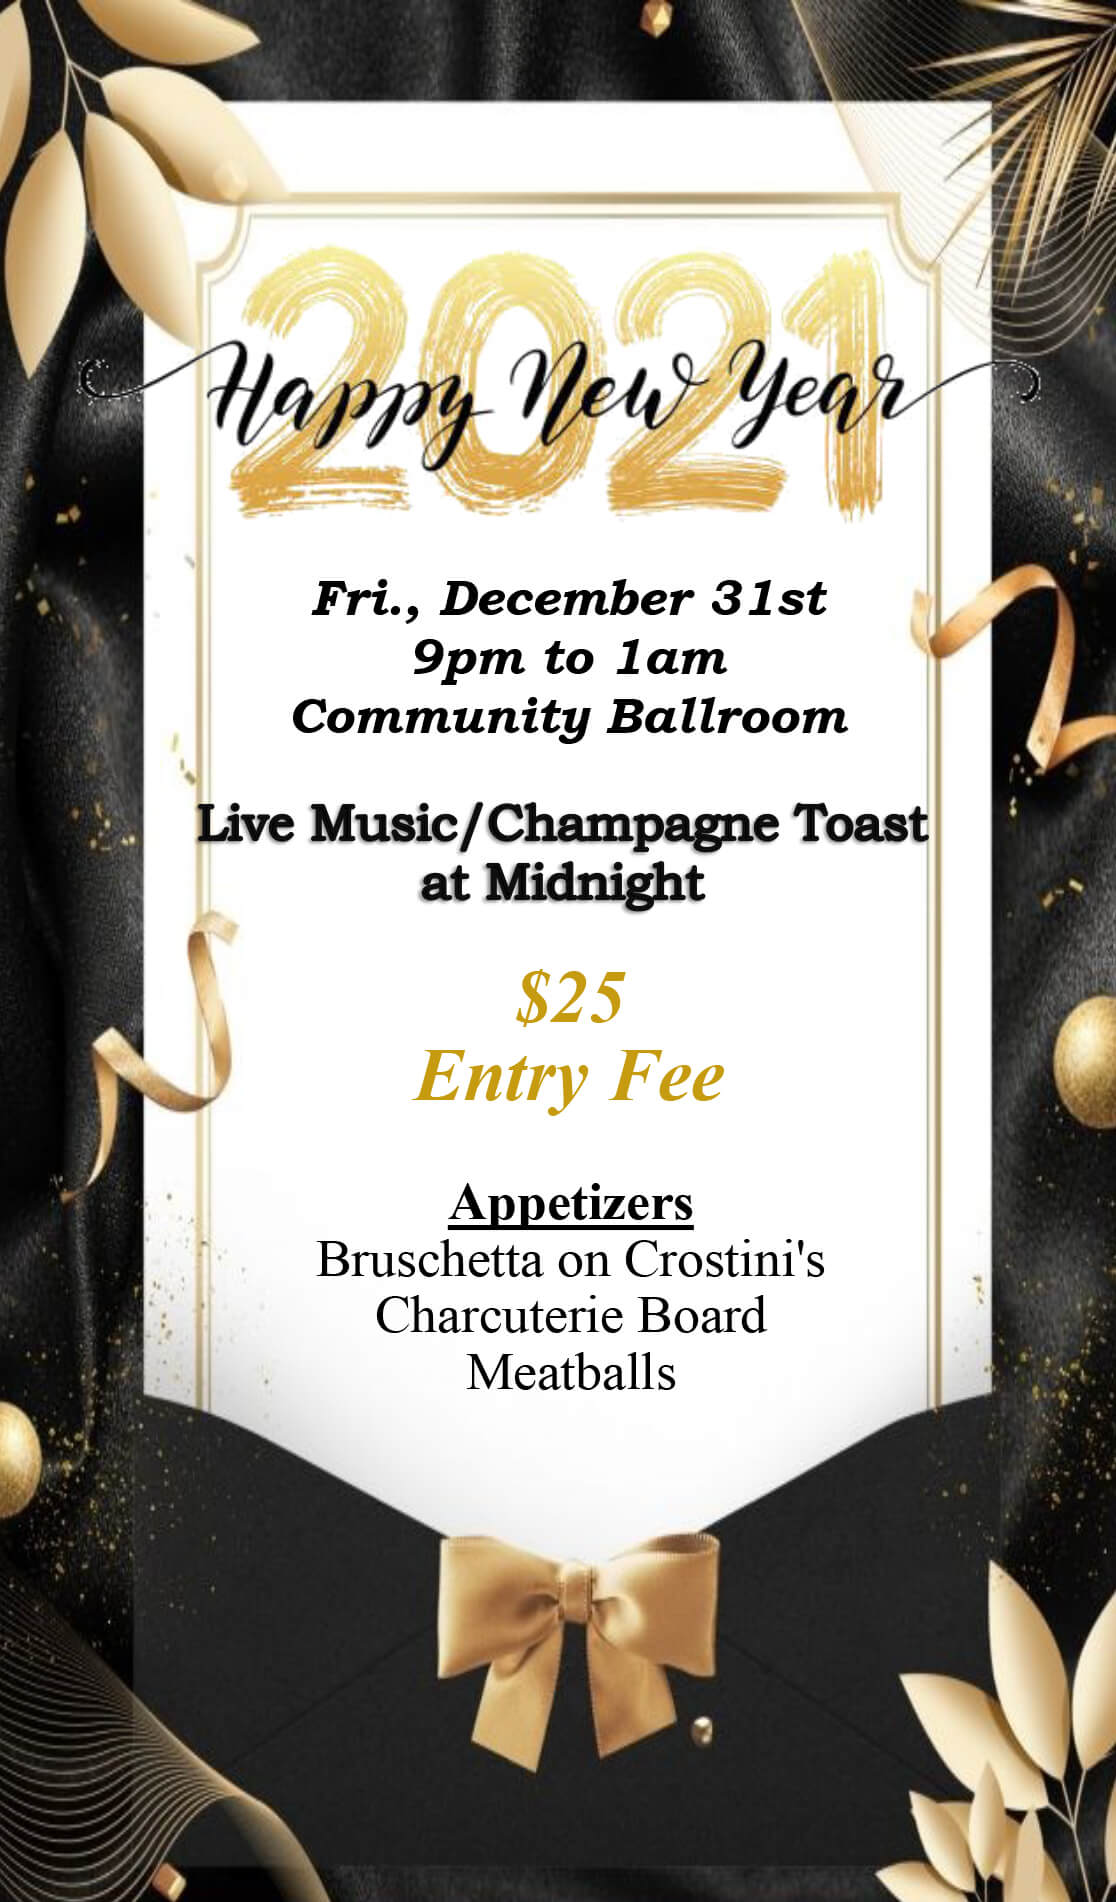 Get your New Year’s Eve Tickets Now! Ventura Country Club